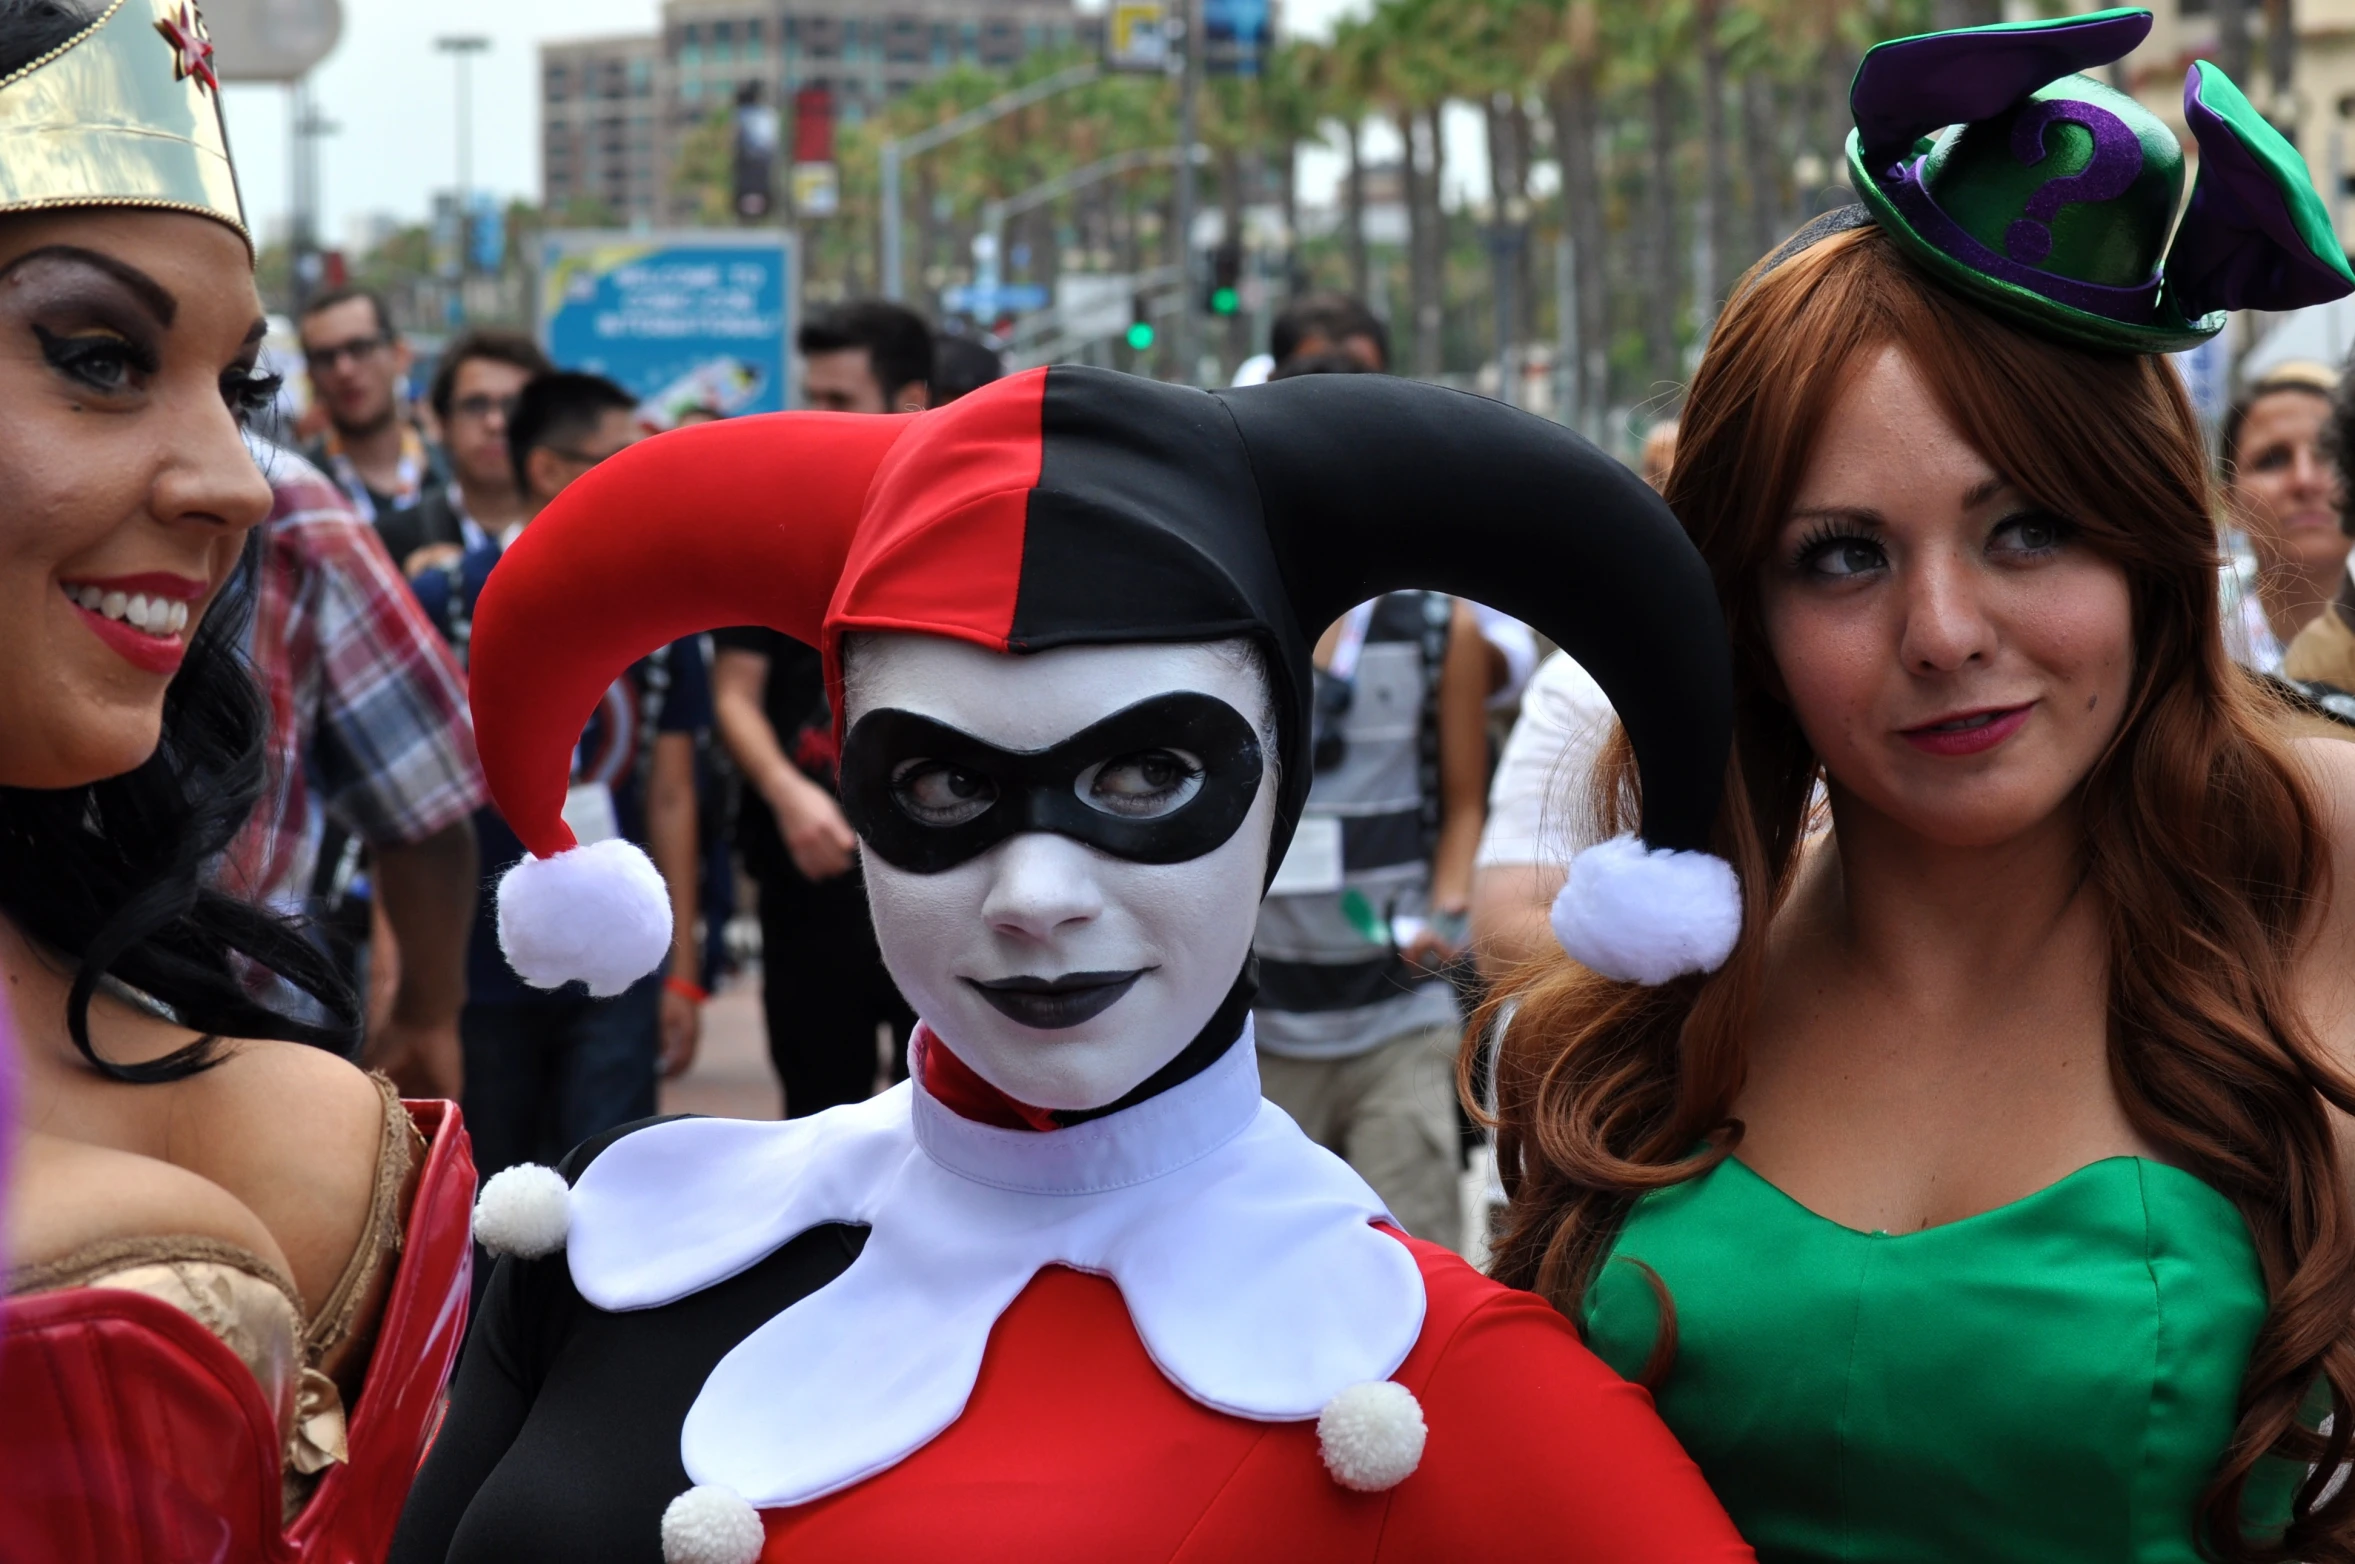 two women in costumes with faces painted in white and black, one wearing green